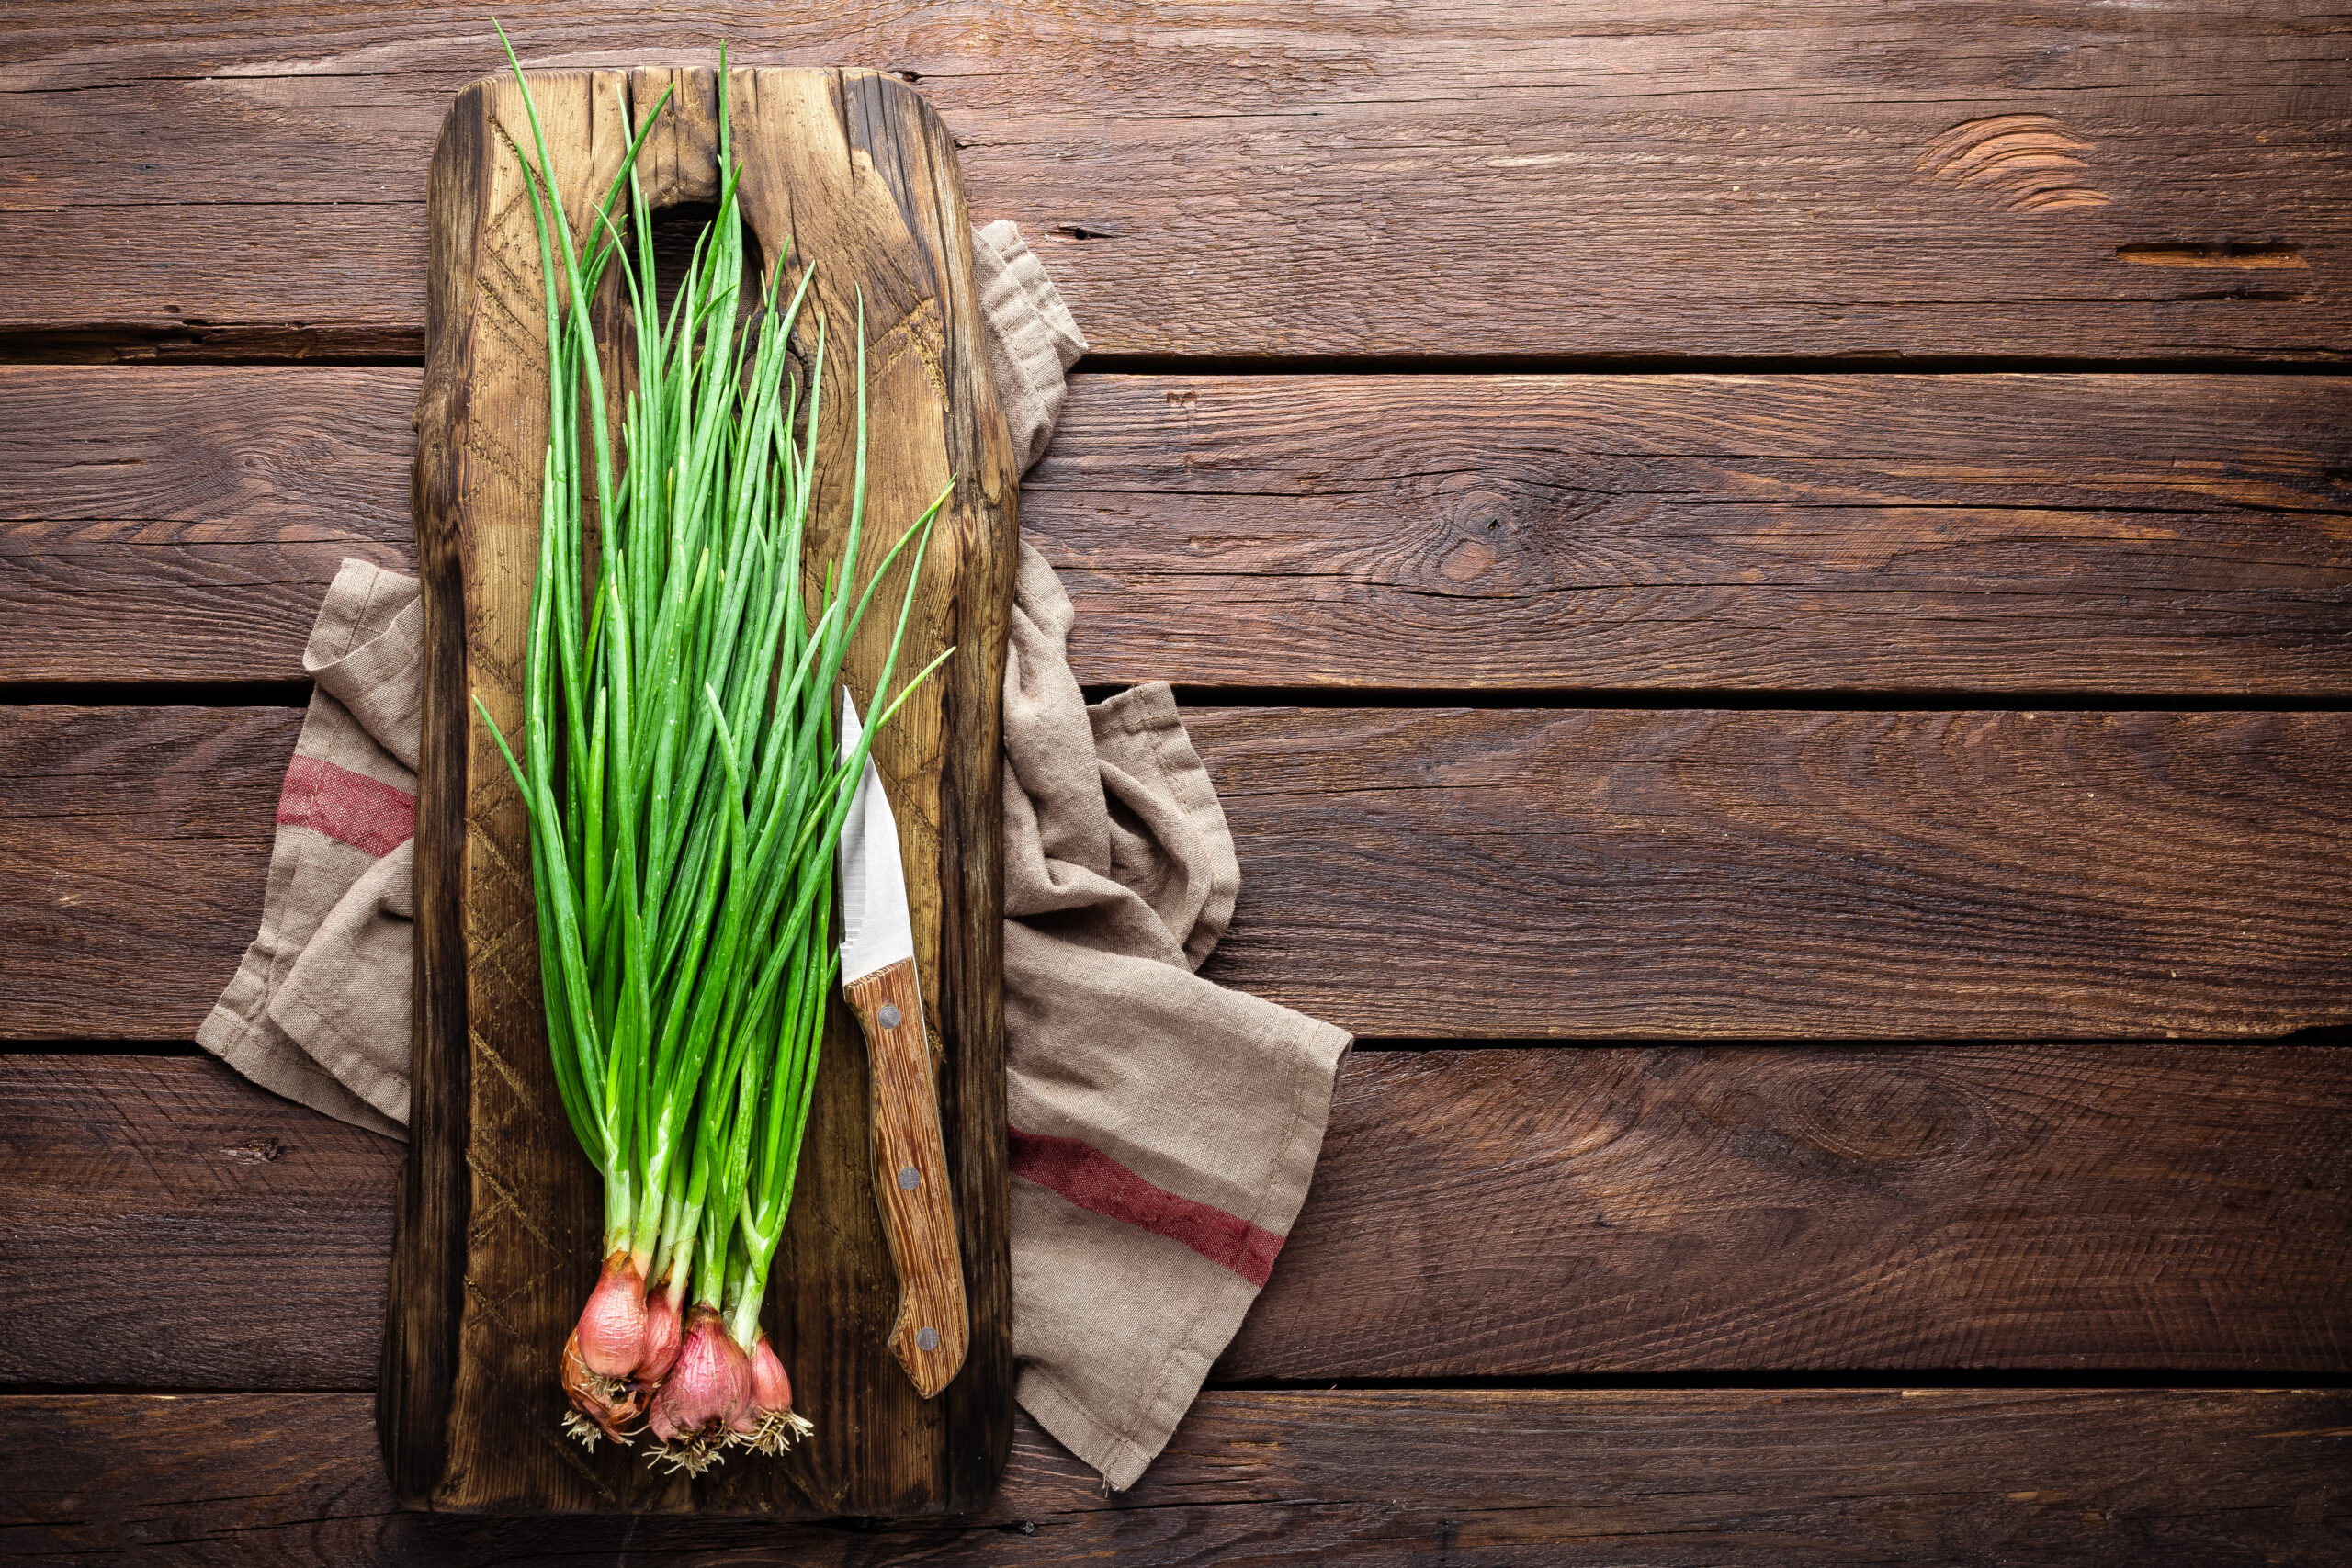 Egyptian Spring Onions | https://fruitsauction.com/